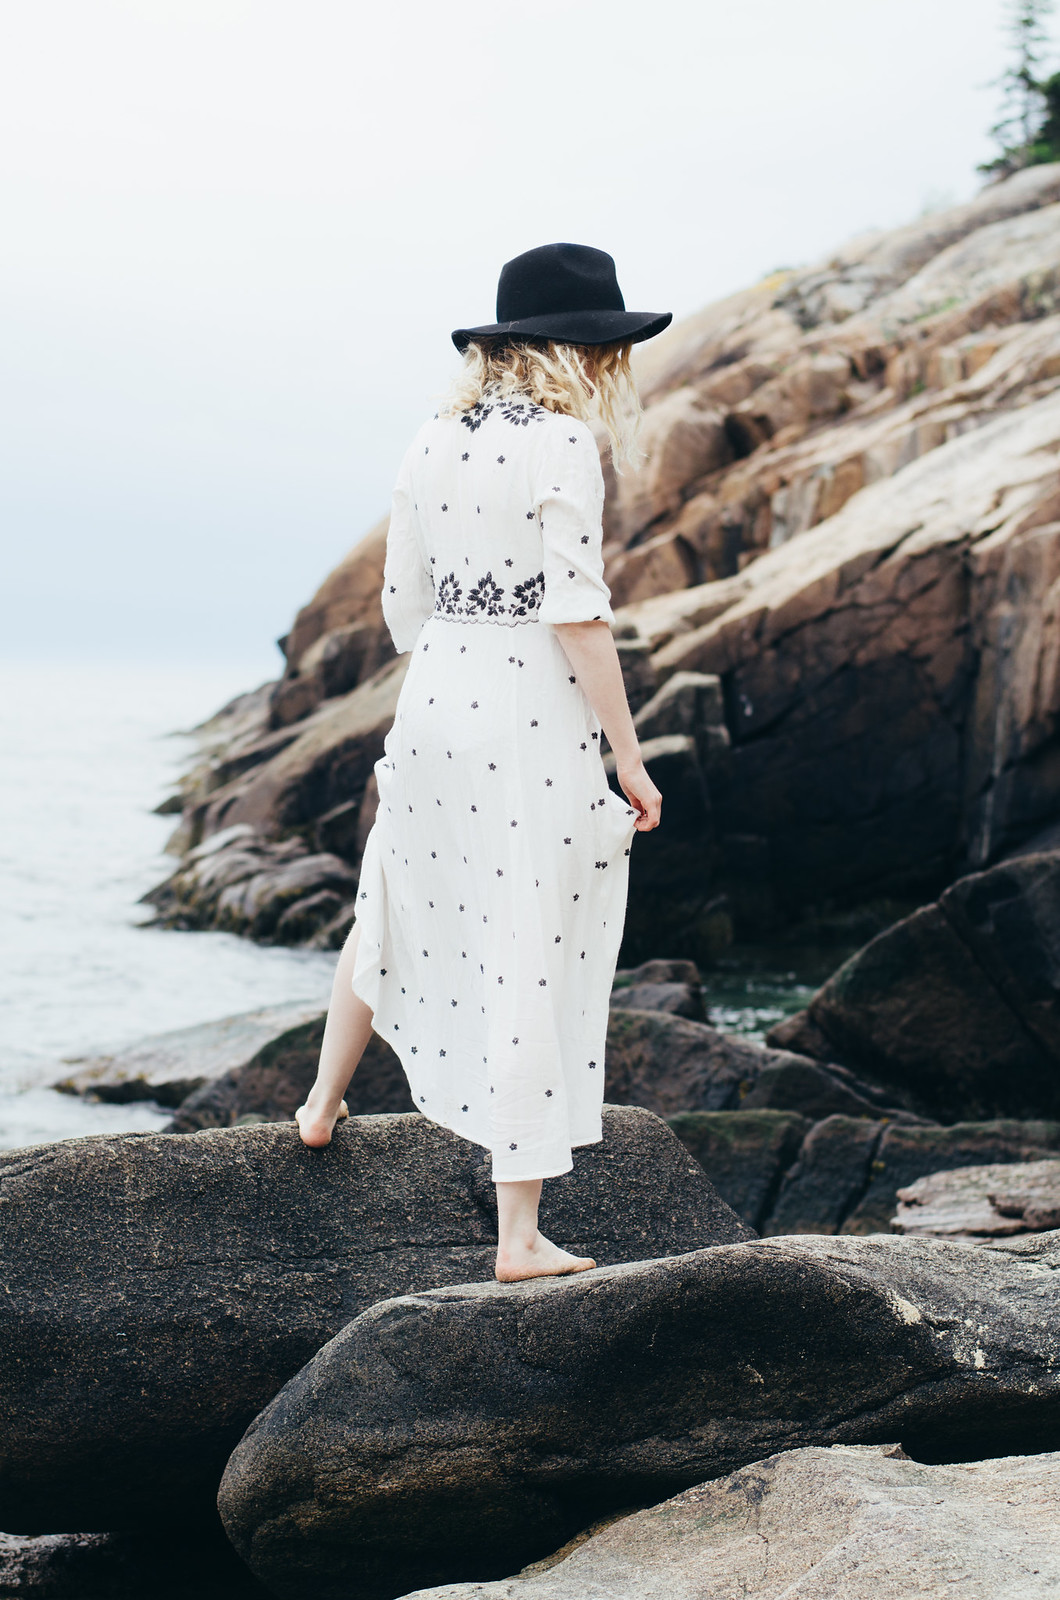 Free People Dress in Acadia Maine shot by Andrew Dion on juliettelaura.blogspot.com